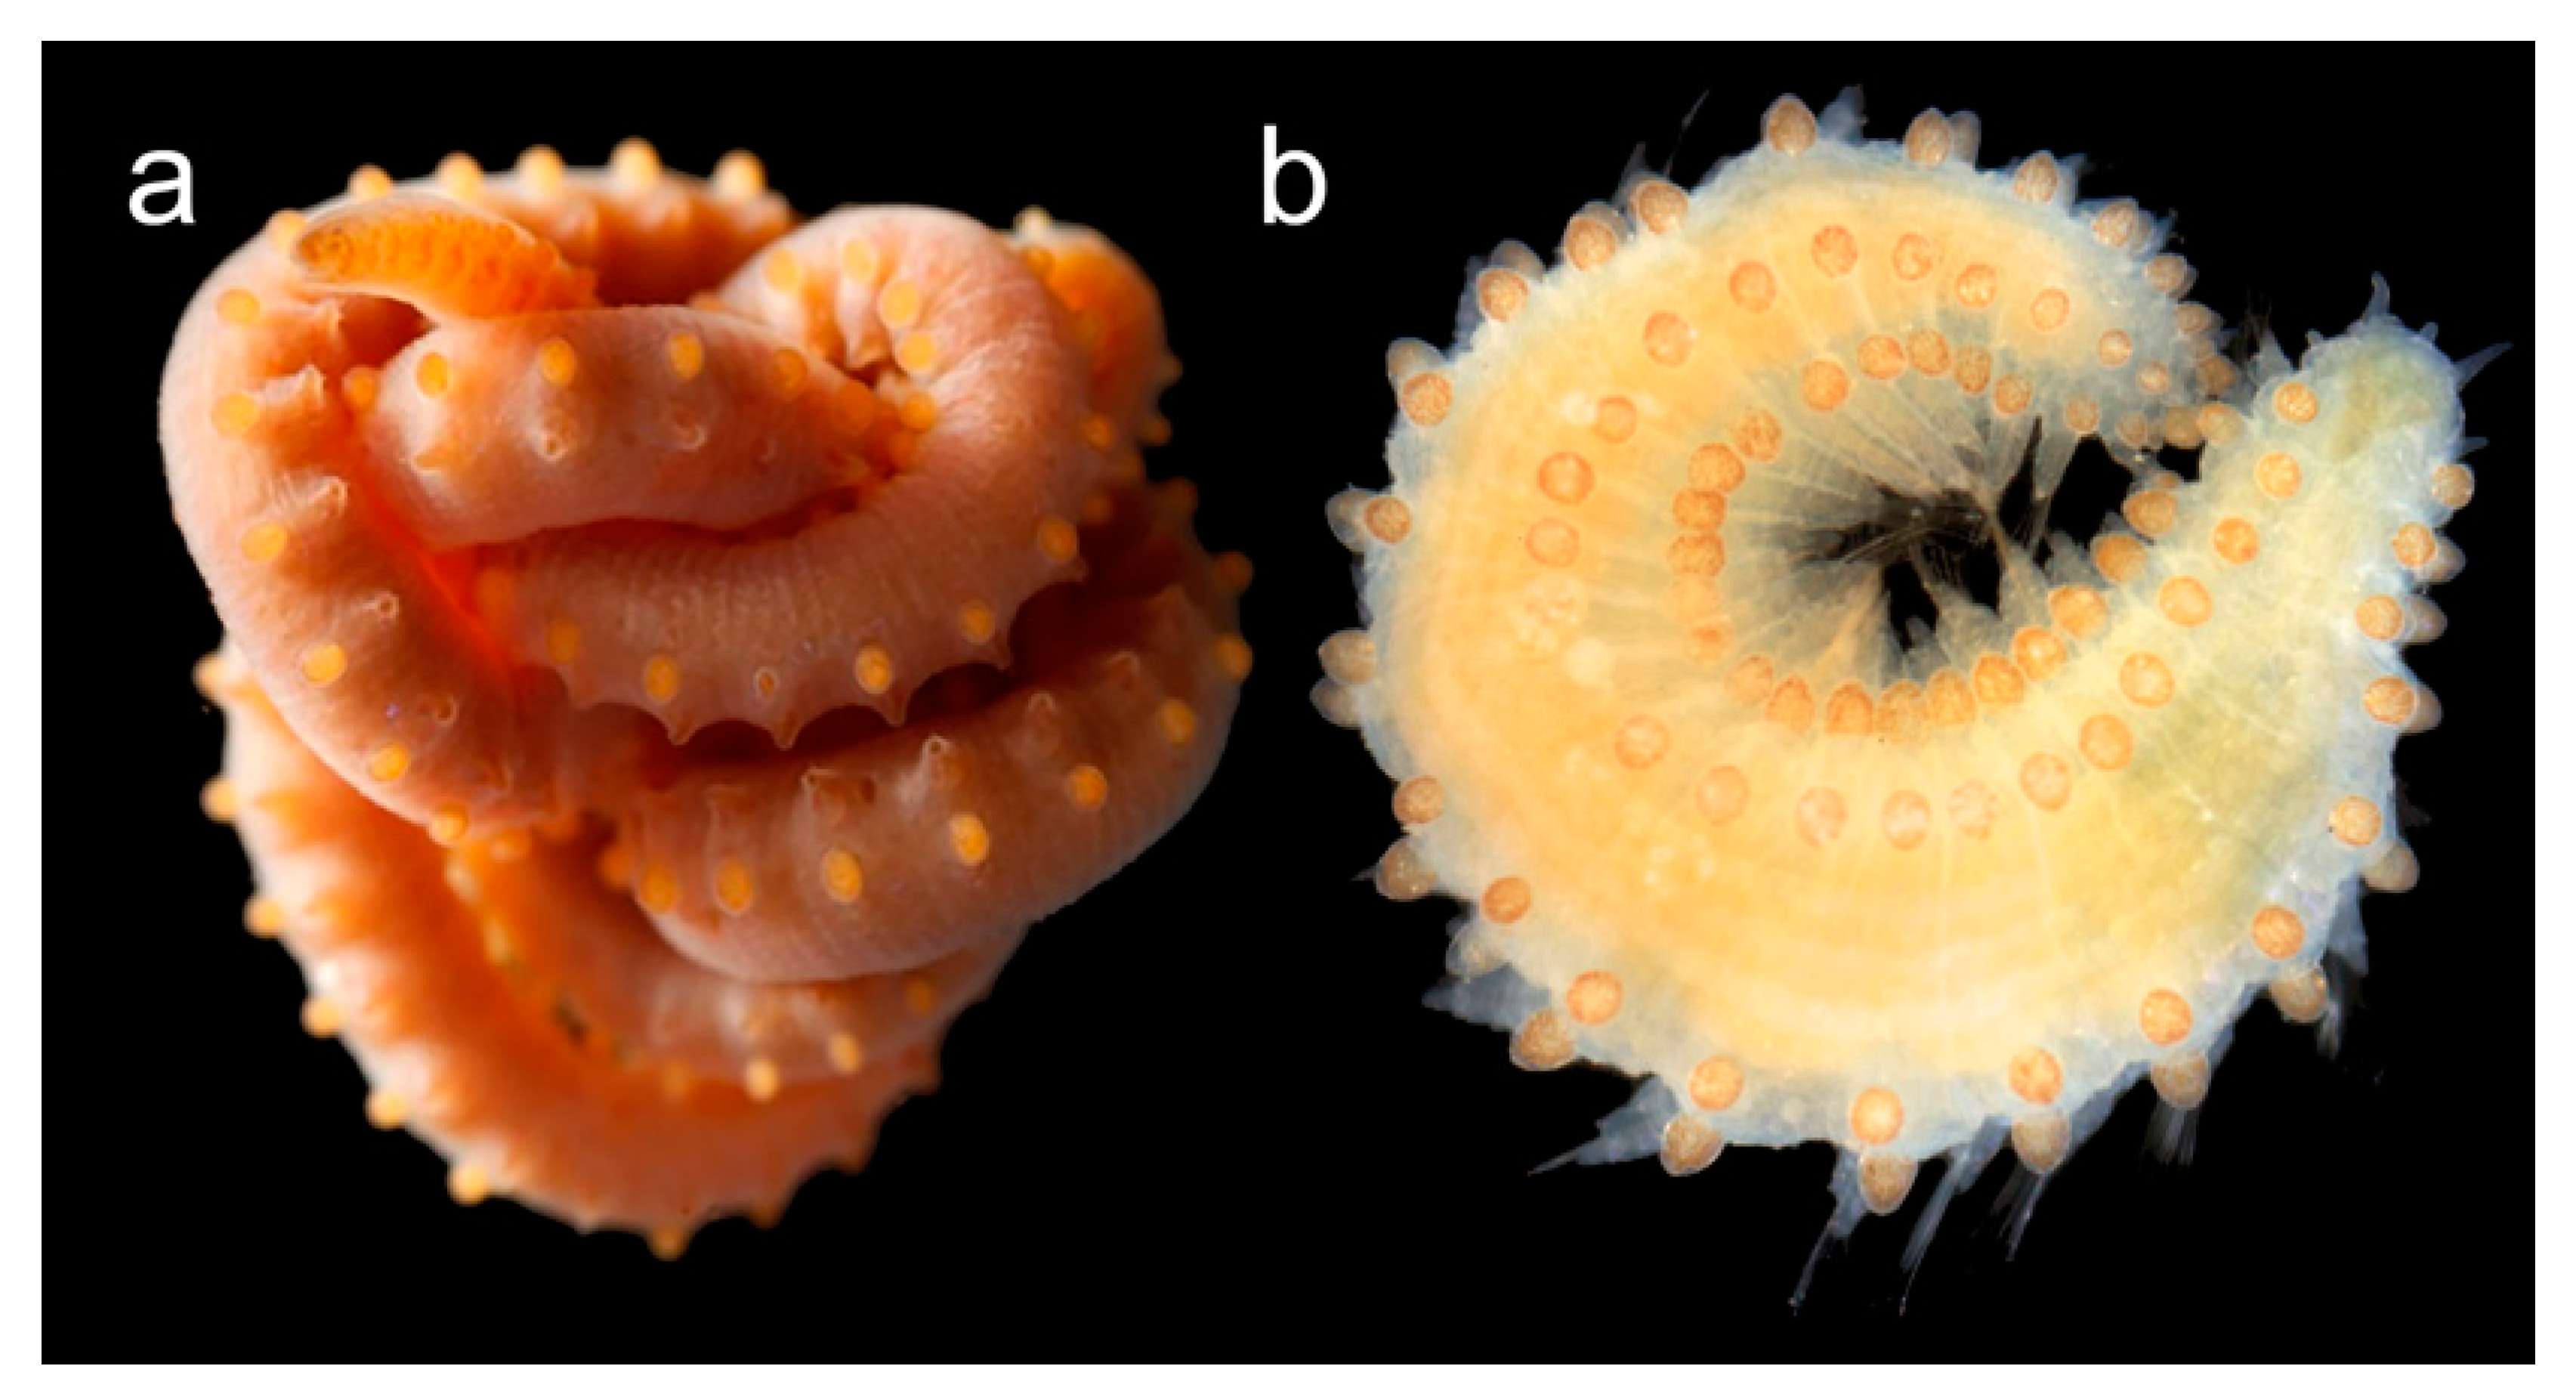 Diversity | Free Full-Text | On the Diversity of Phyllodocida (Annelida:  Errantia), with a Focus on Glyceridae, Goniadidae, Nephtyidae, Polynoidae,  Sphaerodoridae, Syllidae, and the Holoplanktonic Families